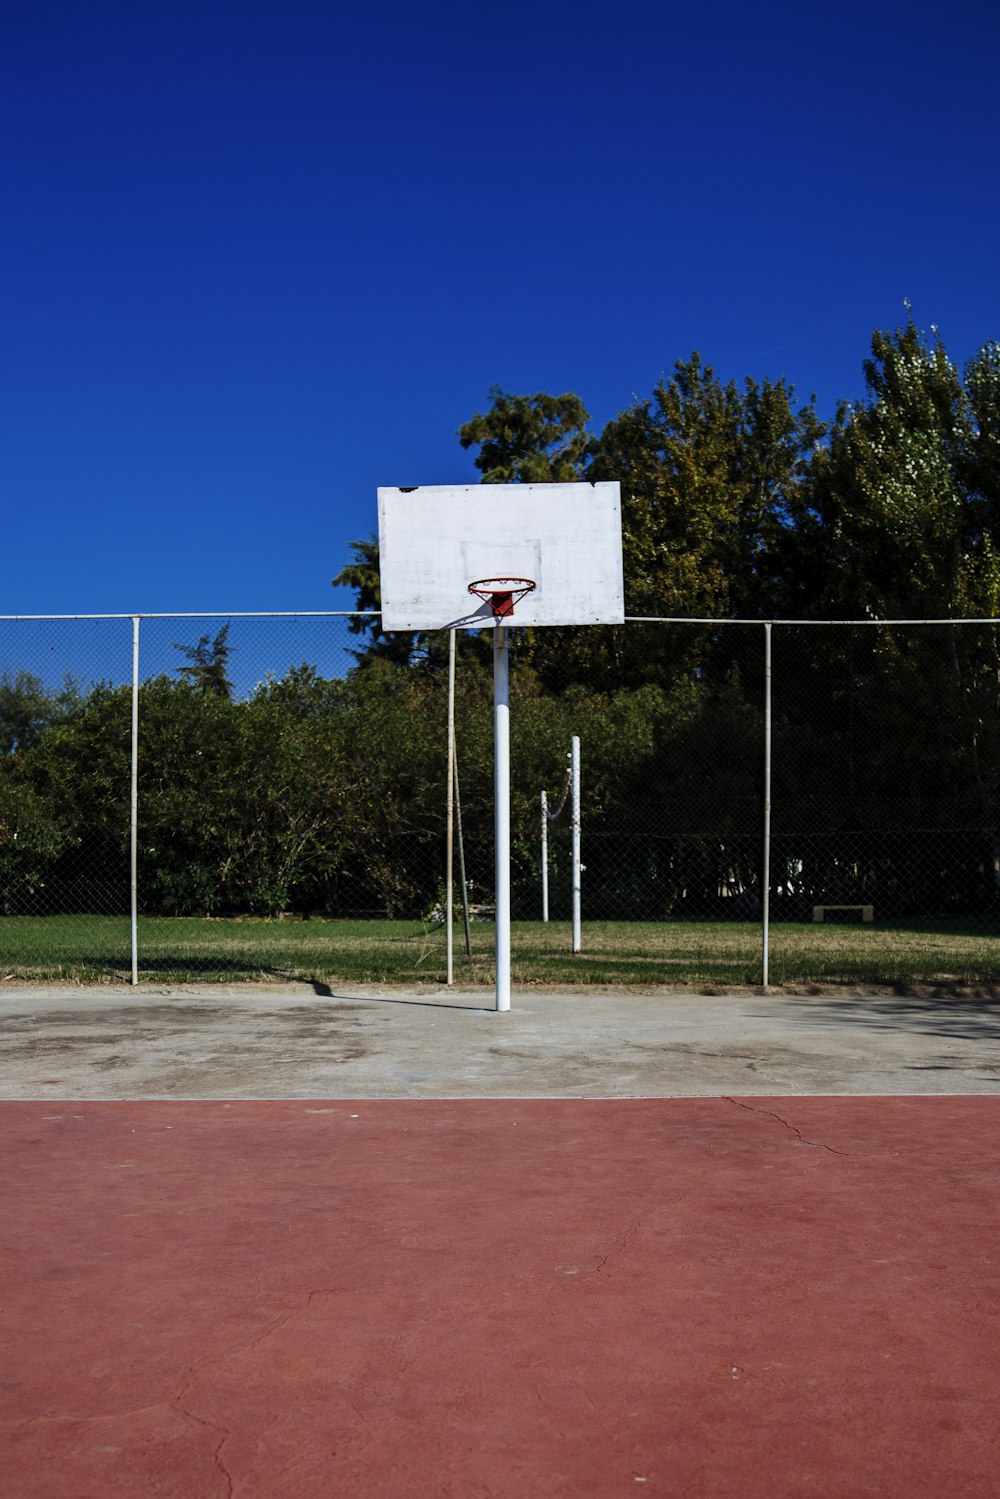 white and red basketball system